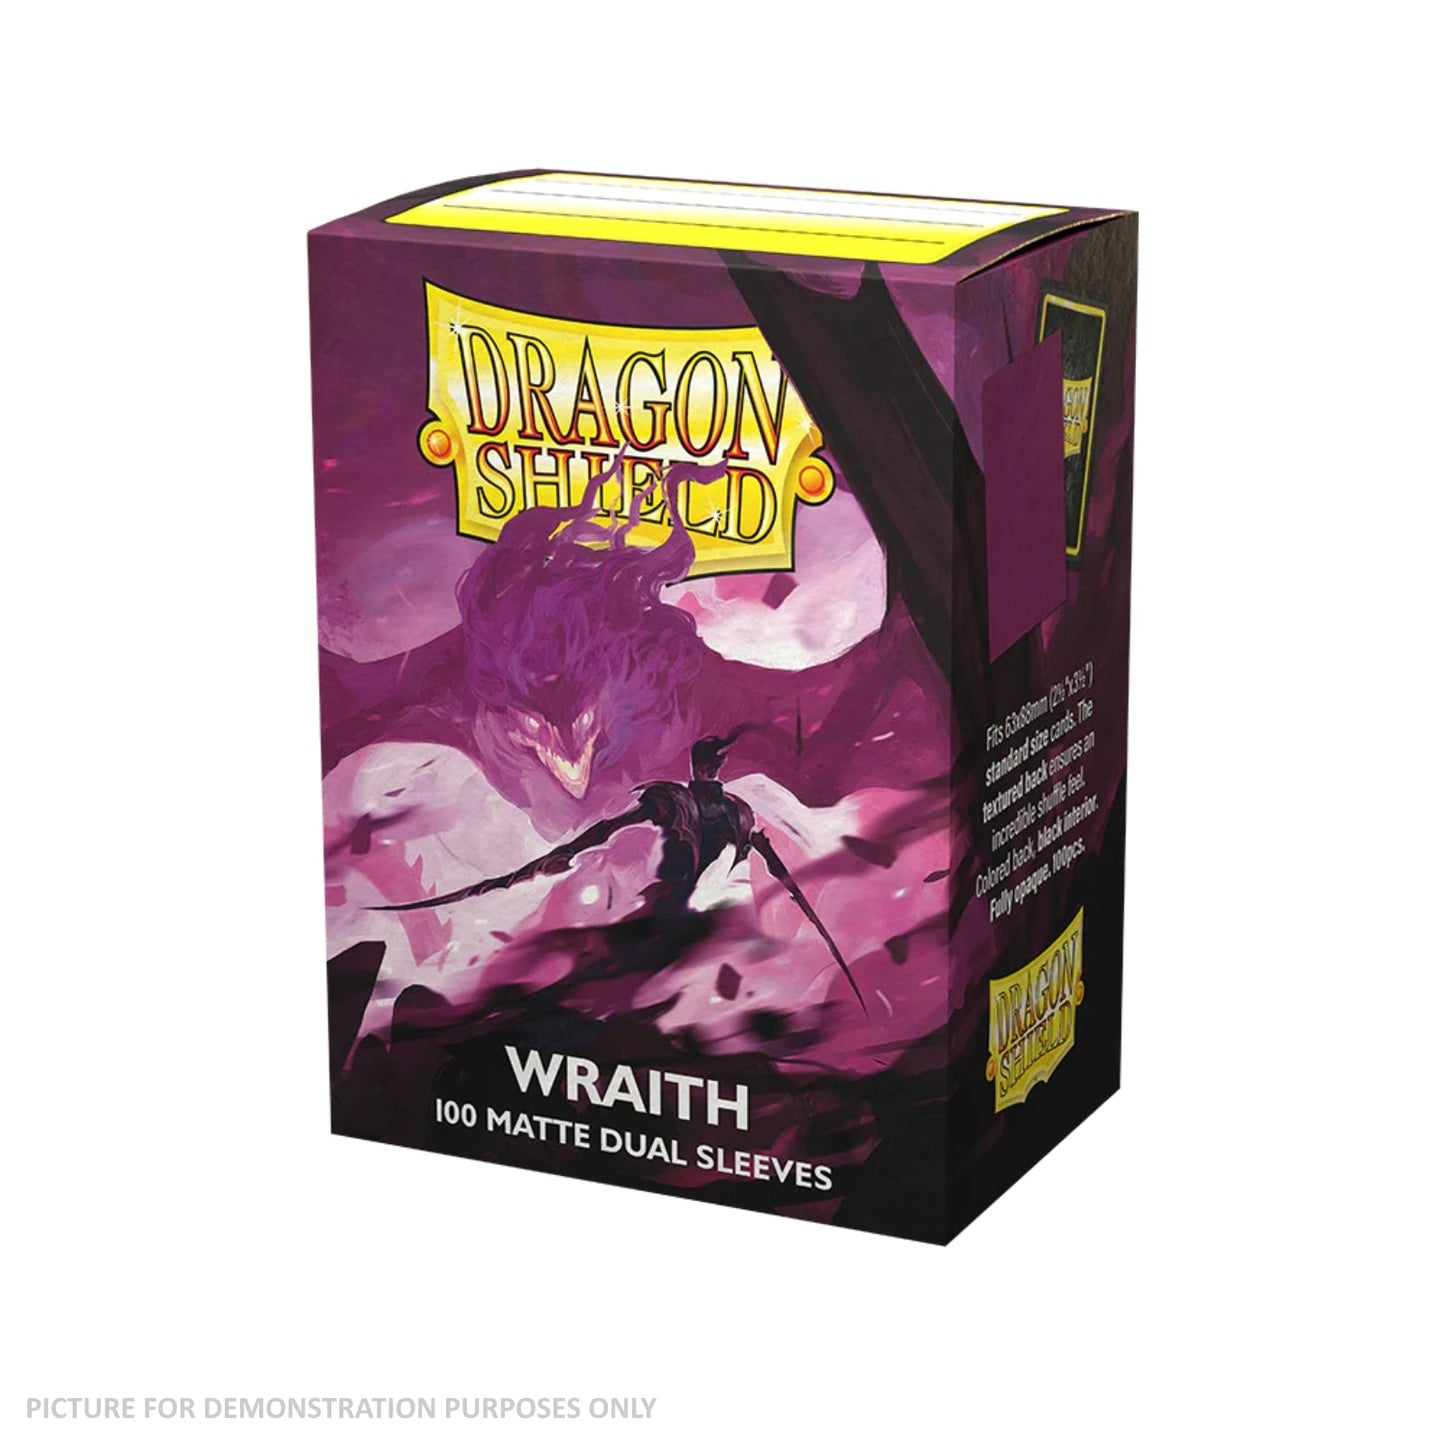 Dragon Shield 100 Standard Size Card DUEL Sleeves - Matte Wraith